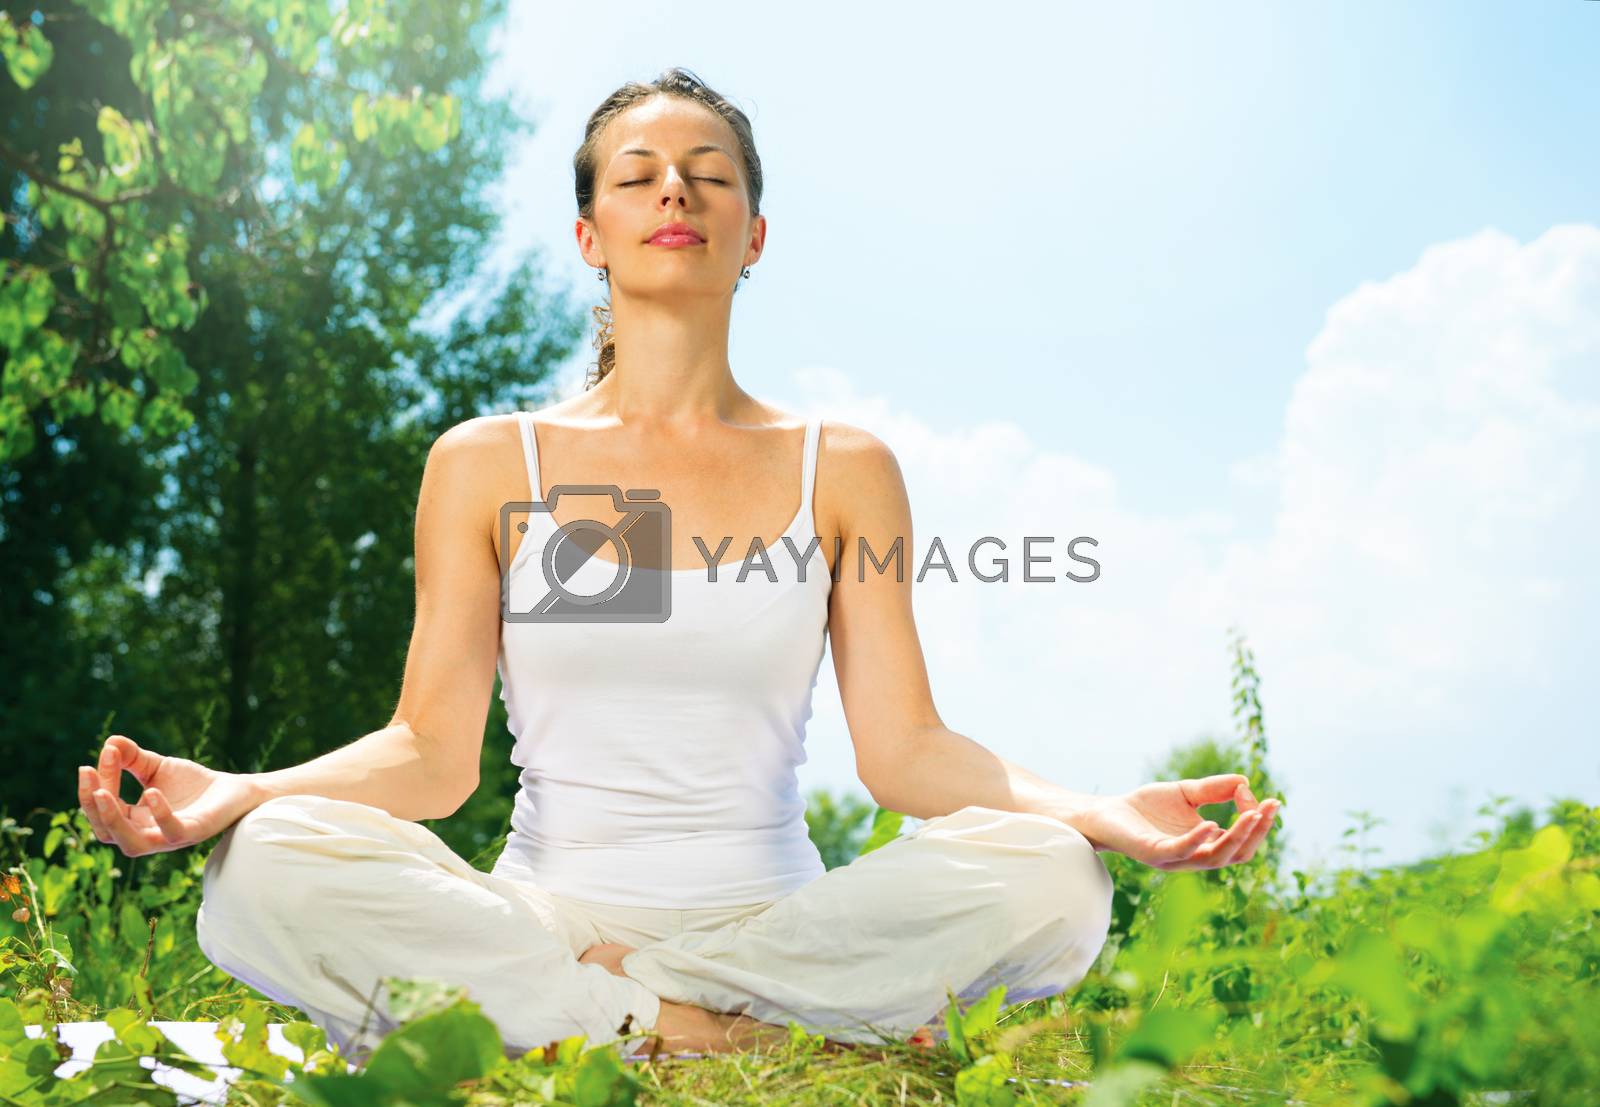 Royalty free image of Young Woman doing Yoga Exercises Outdoor by SubbotinaA